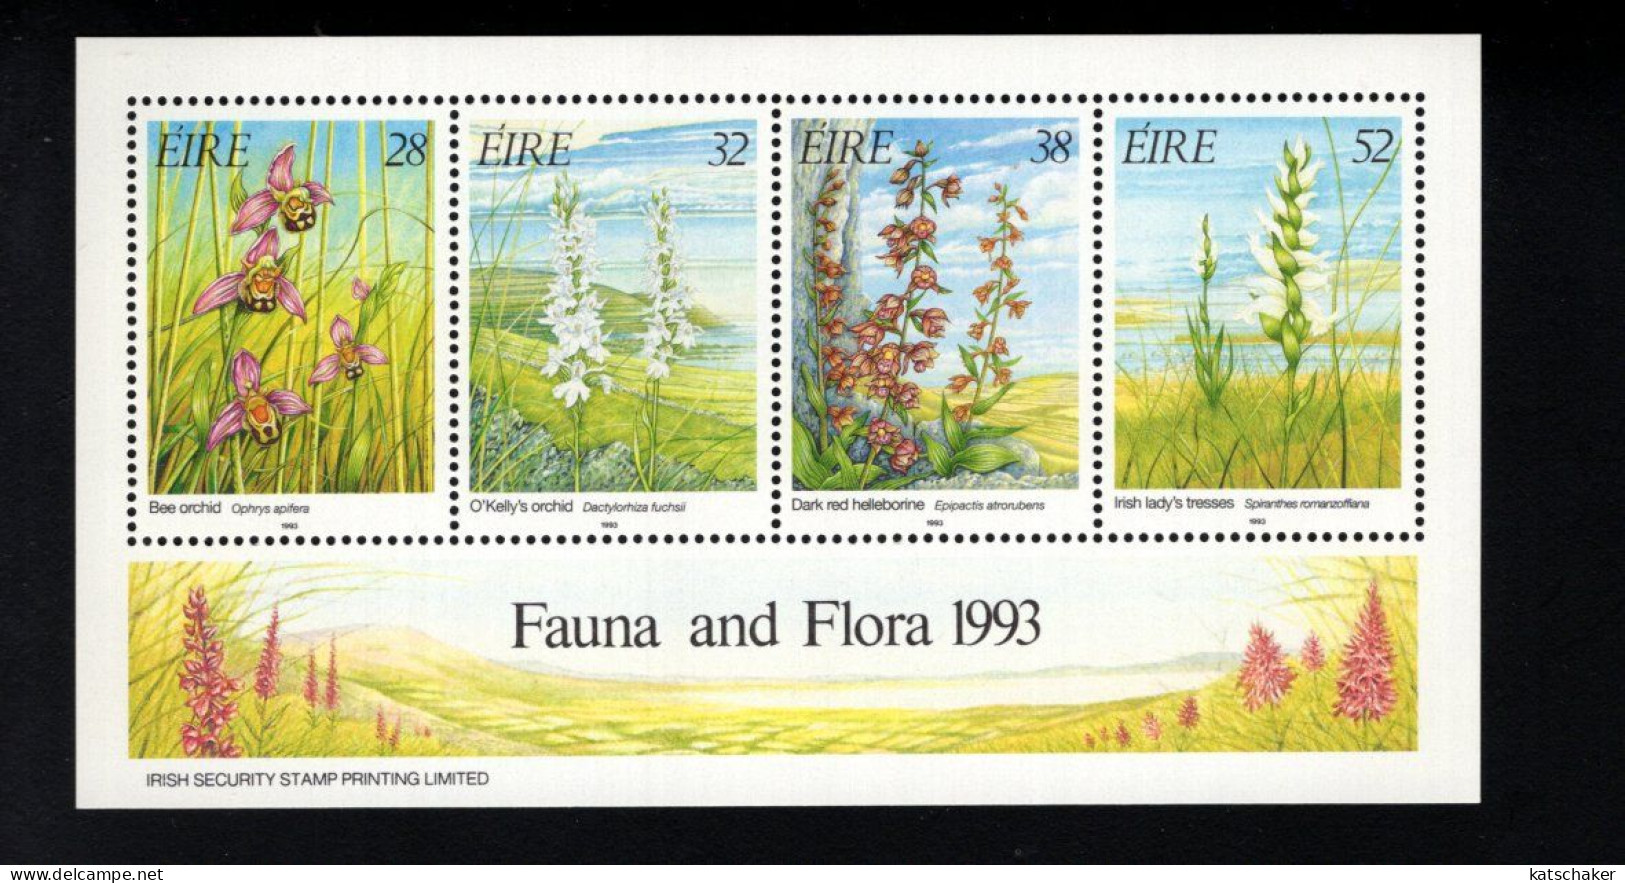 1993954214 1993 SCOTT 894A  (XX) POSTFRIS MINT NEVER HINGED - FLORA - FLOWERS - ORCHIDS - Unused Stamps